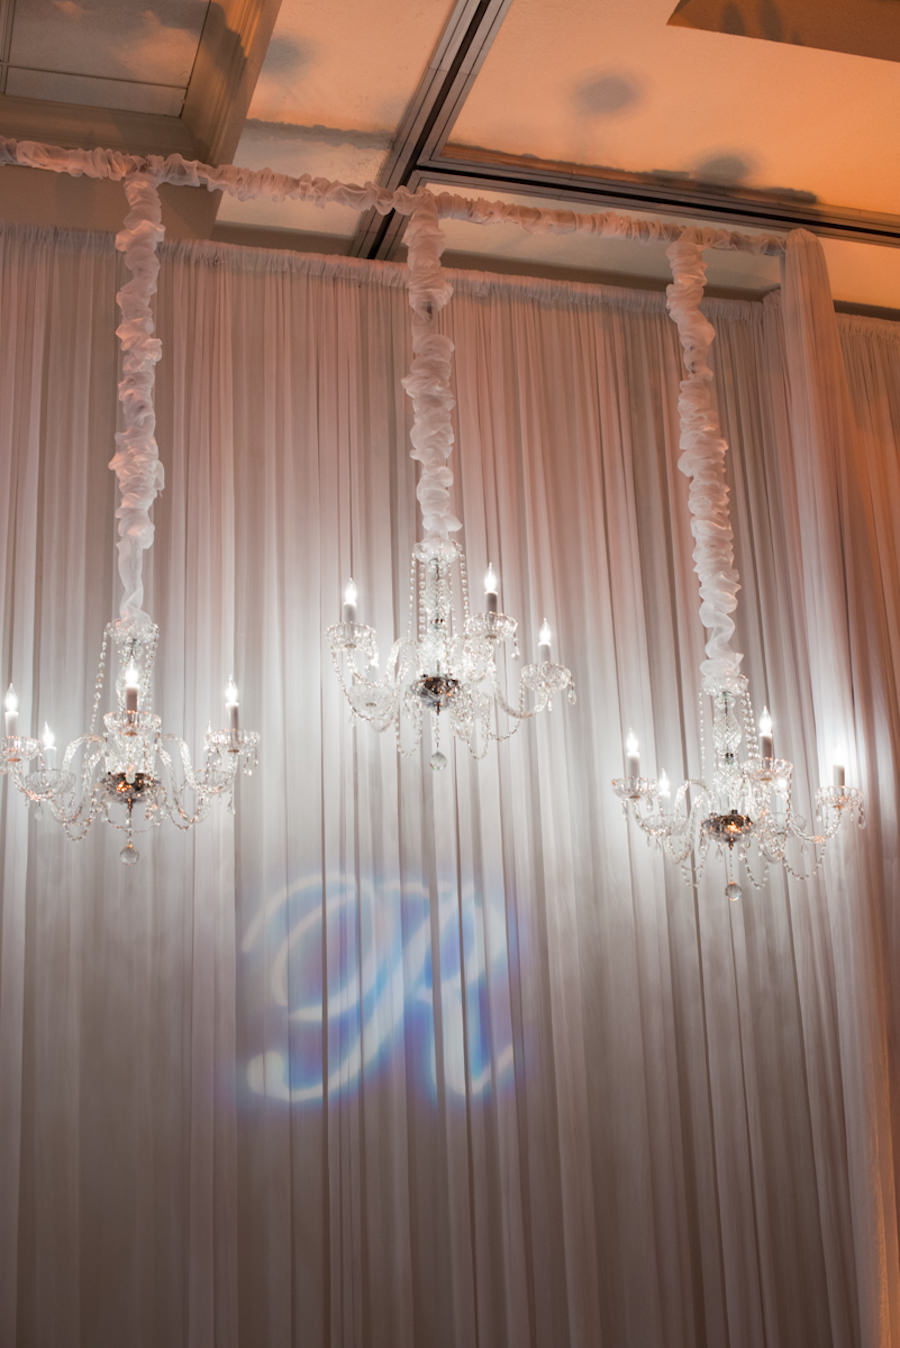 Wedding Monogram in Uplighting with Draping and Suspended Crystal Candelabras | St. Petersburg Wedding Photographer Castorina Photography